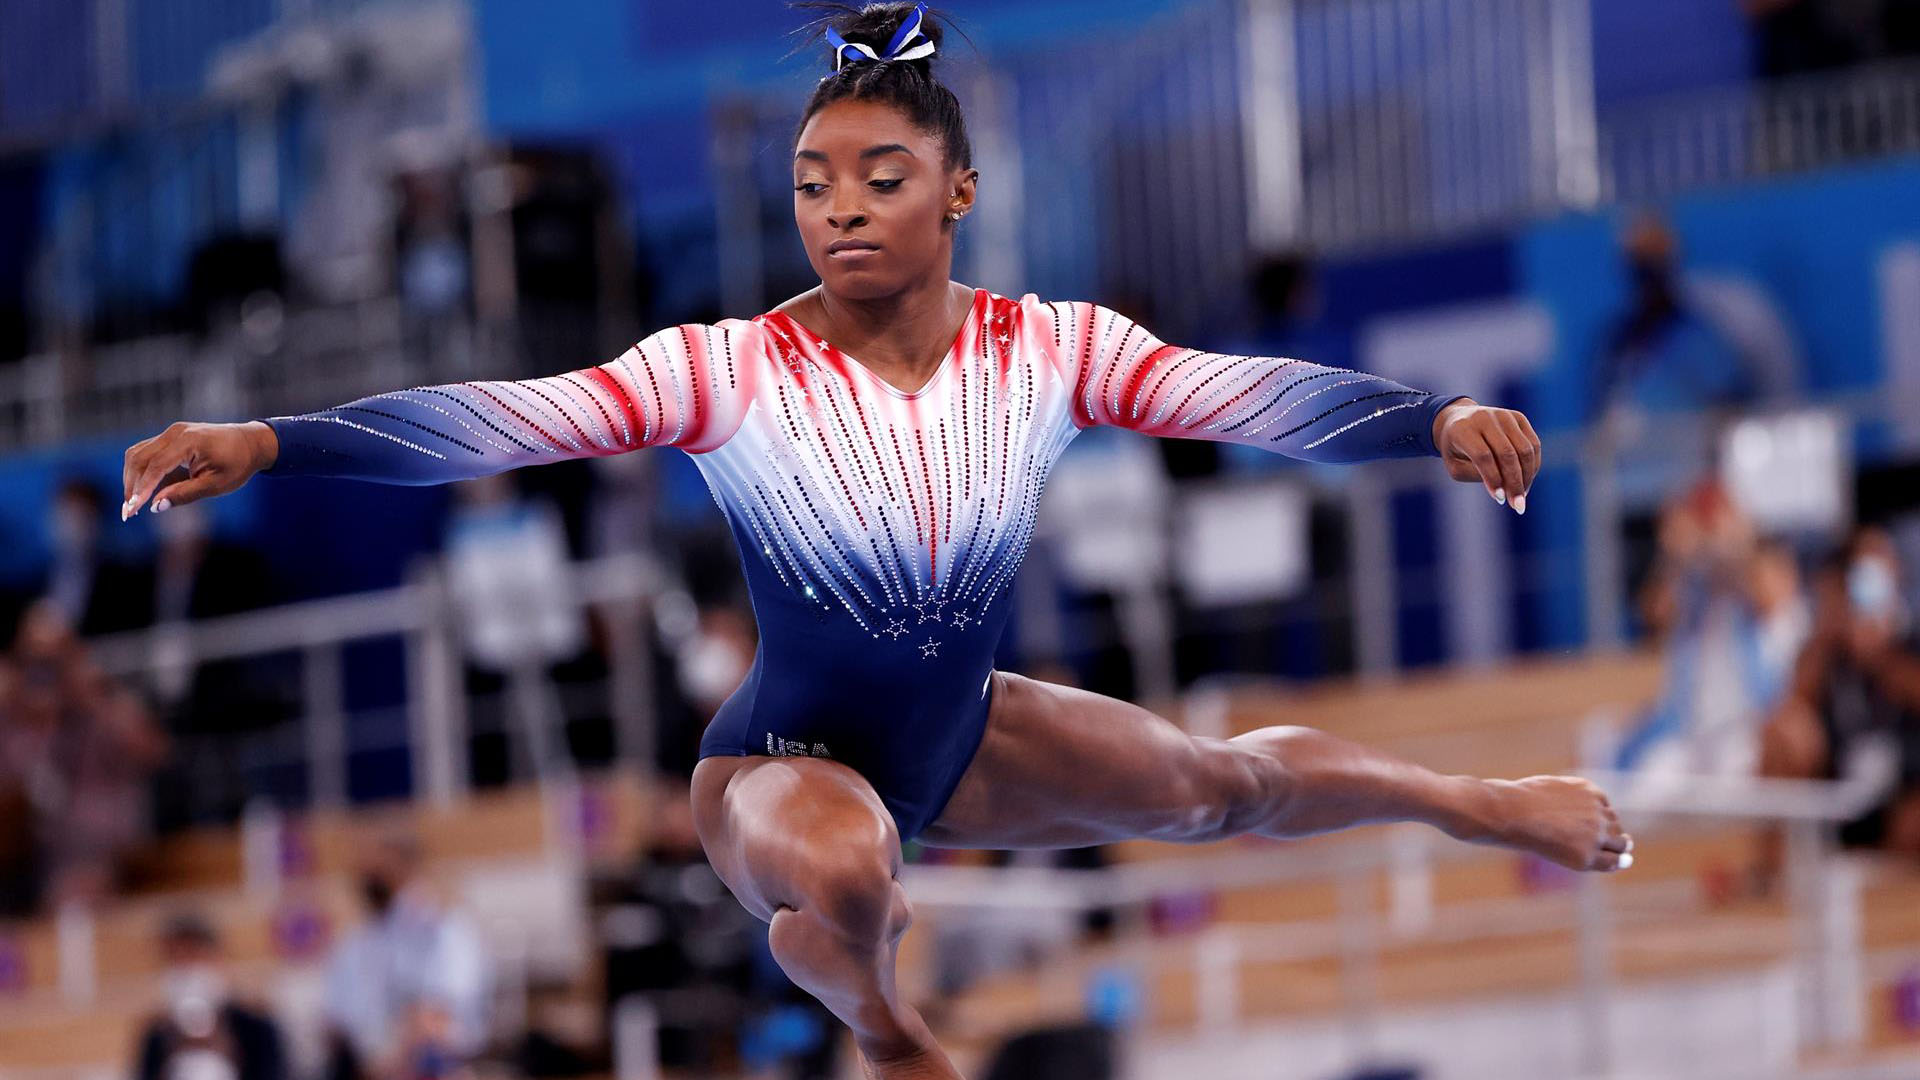 I did it for me': Simone Biles returns to Olympics to win bronze